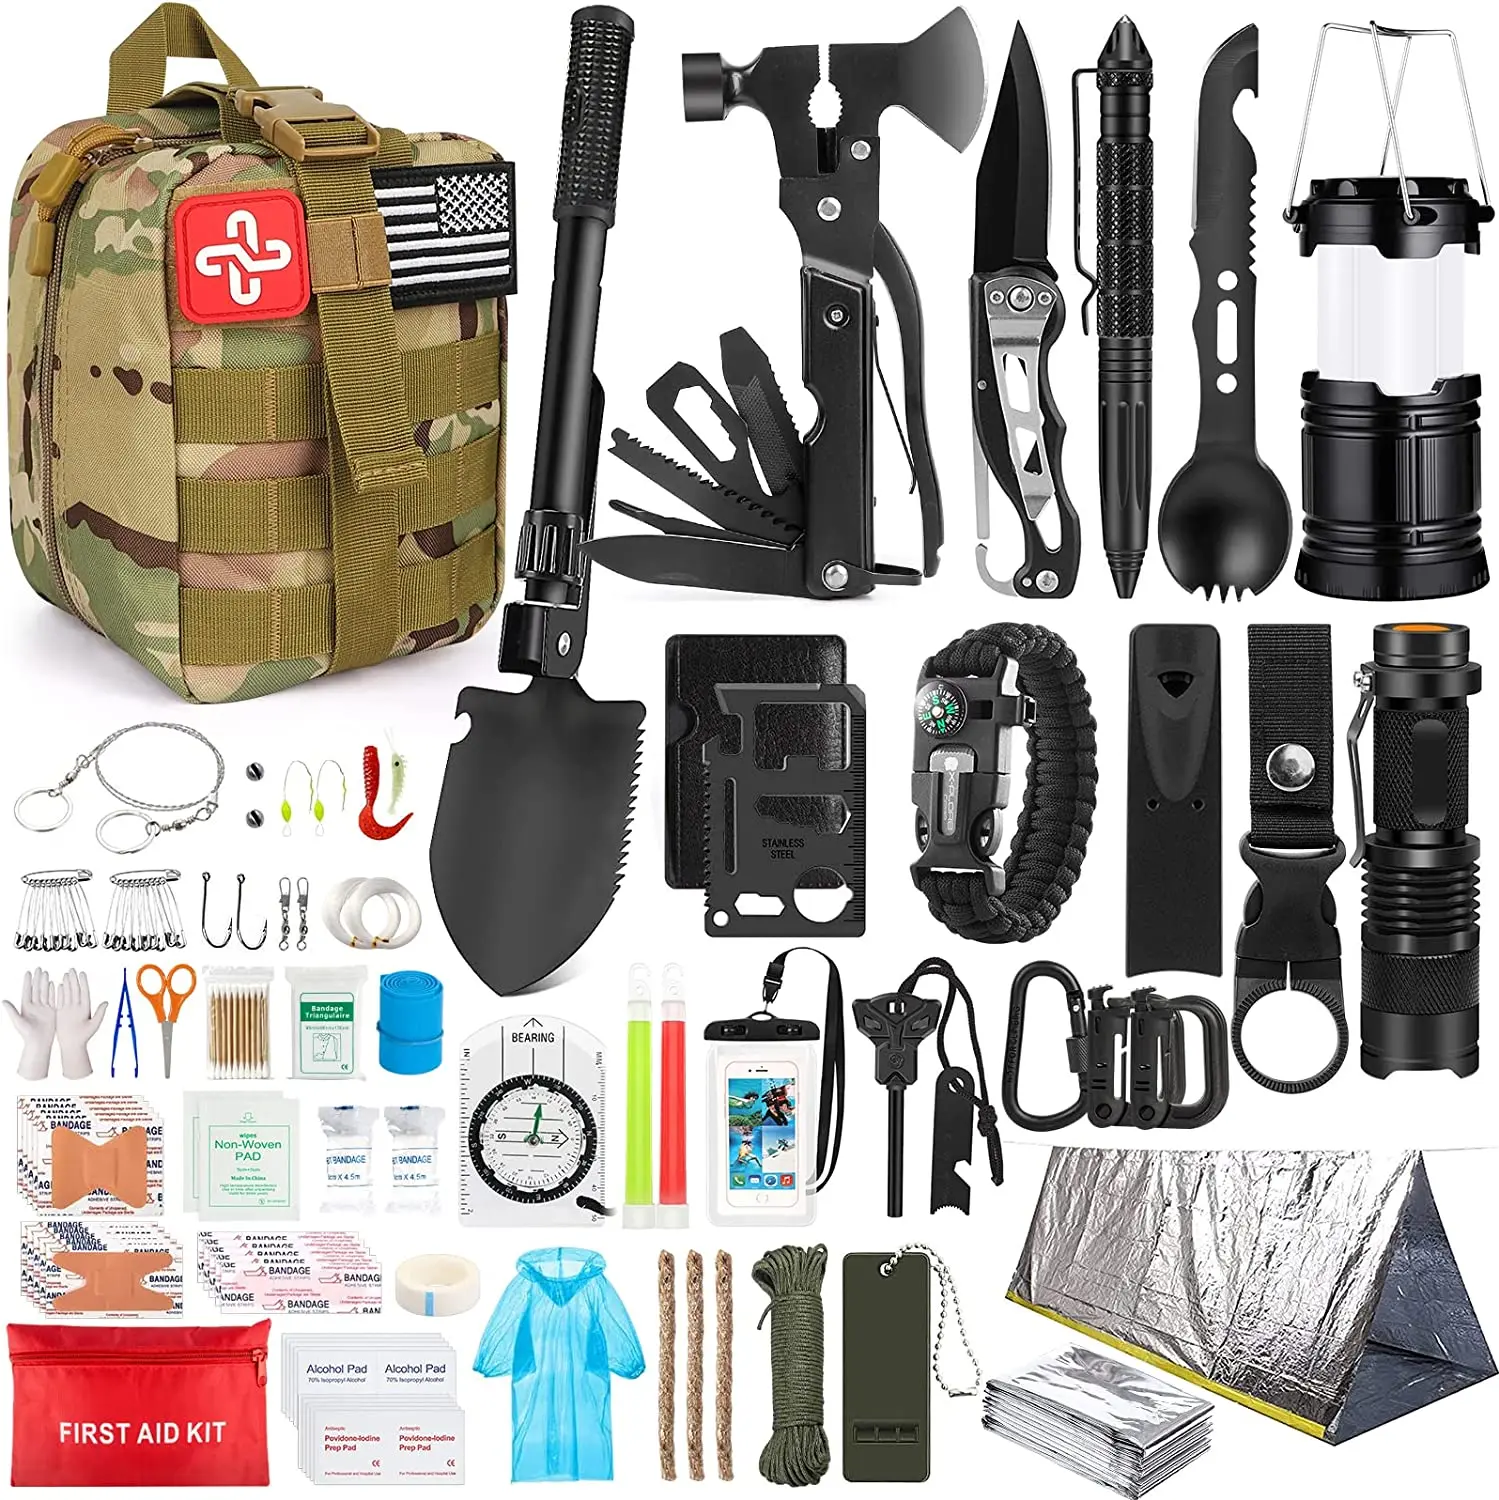 Survival Kit Survival Gear First Aid Kit With Compatible Bag And ...